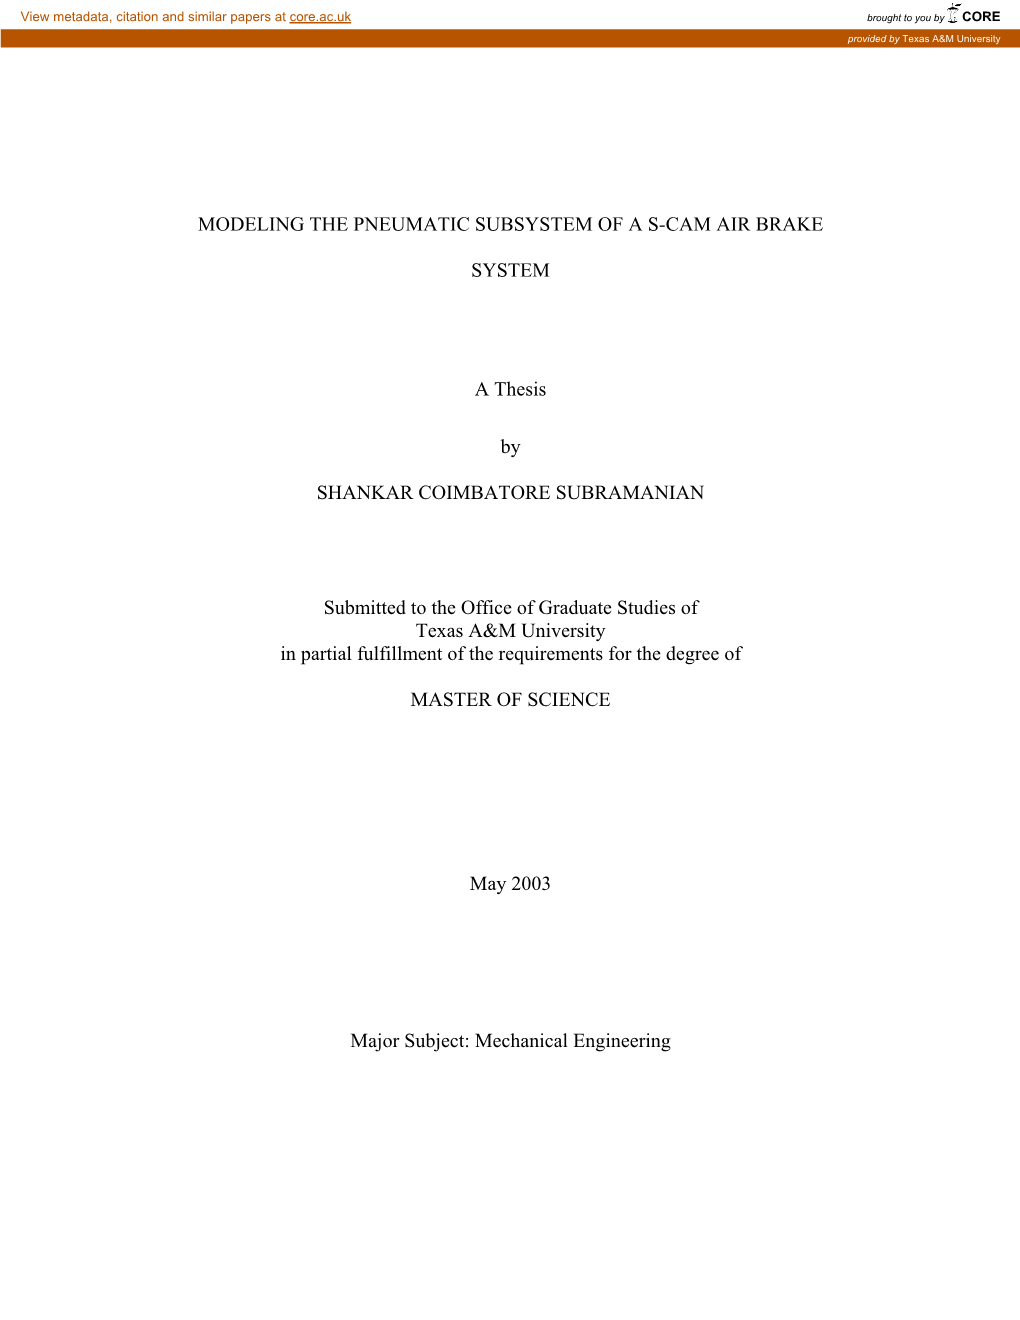 MODELING the PNEUMATIC SUBSYSTEM of a S-CAM AIR BRAKE SYSTEM a Thesis by SHANKAR COIMBATORE SUBRAMANIAN Submitted to the Office